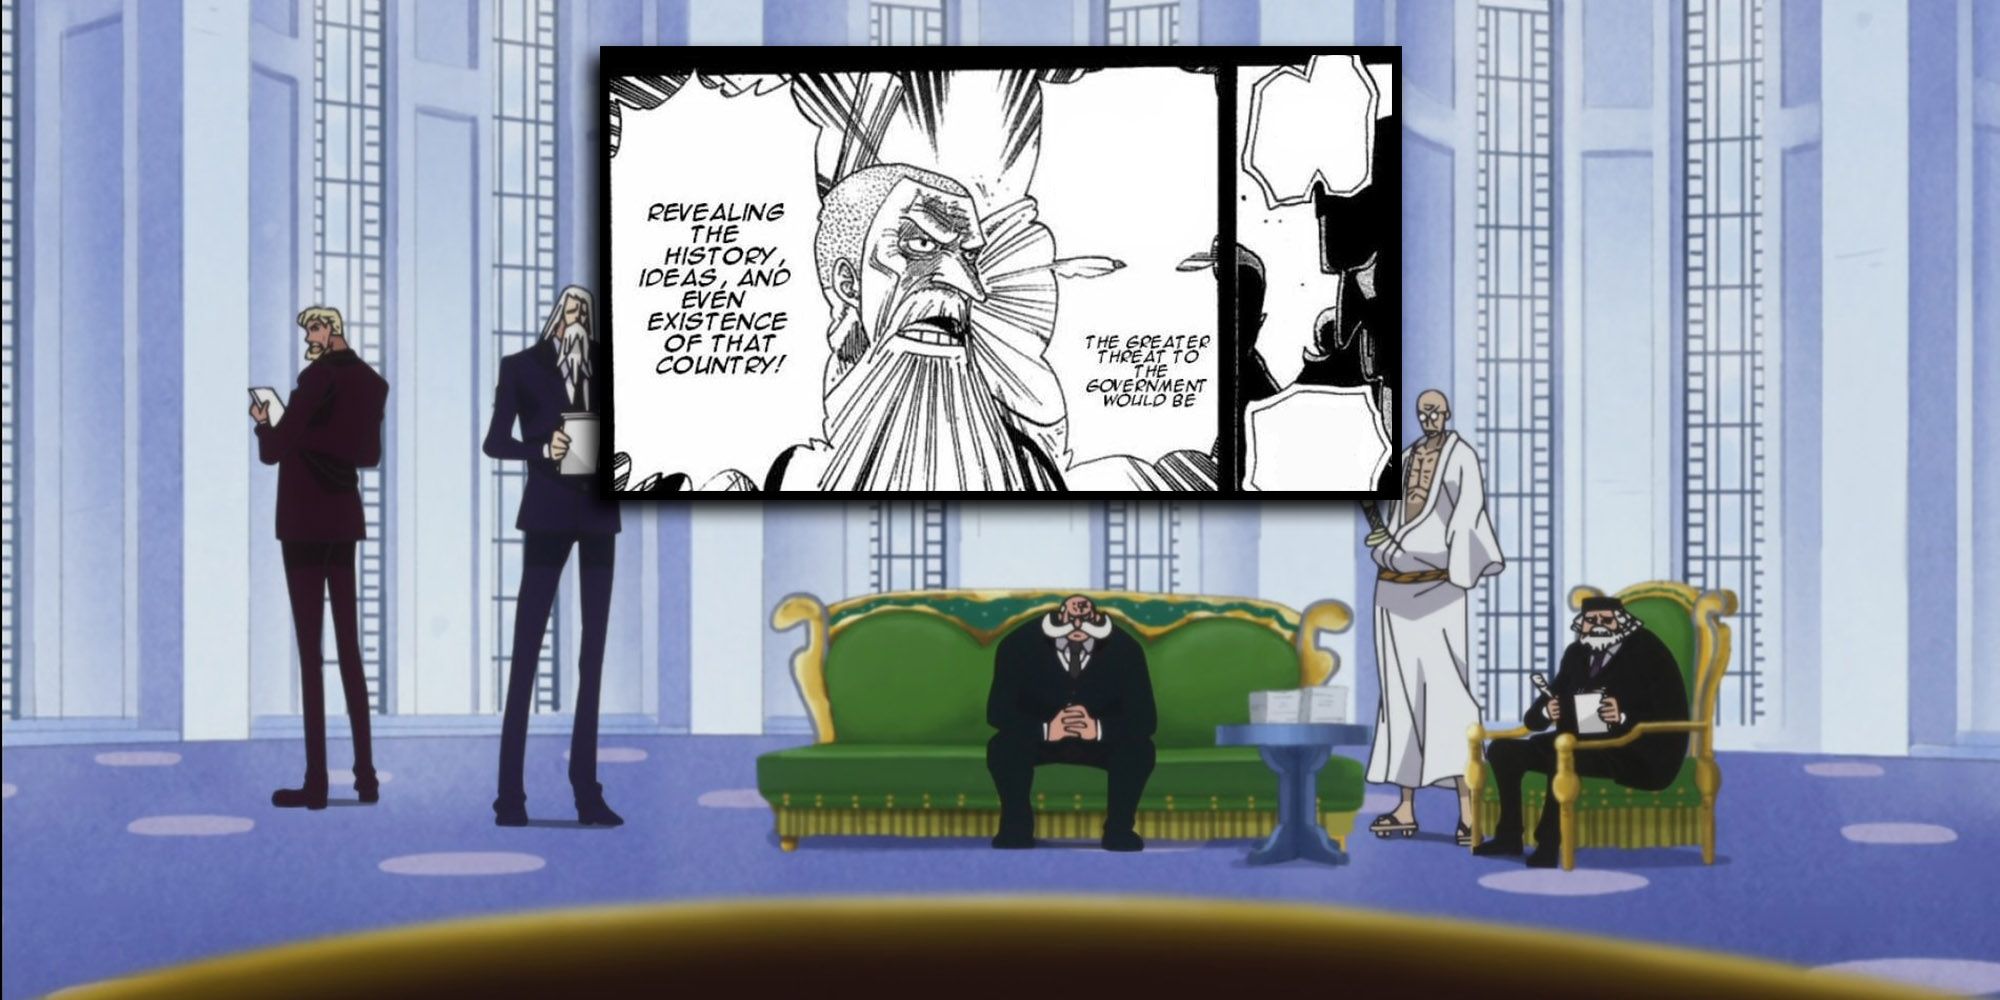 One Piece - Five Elders In Room Of Authority With Panel Of Professor Ohara Talking To Them About The Great Kingdom Overlaid On Top